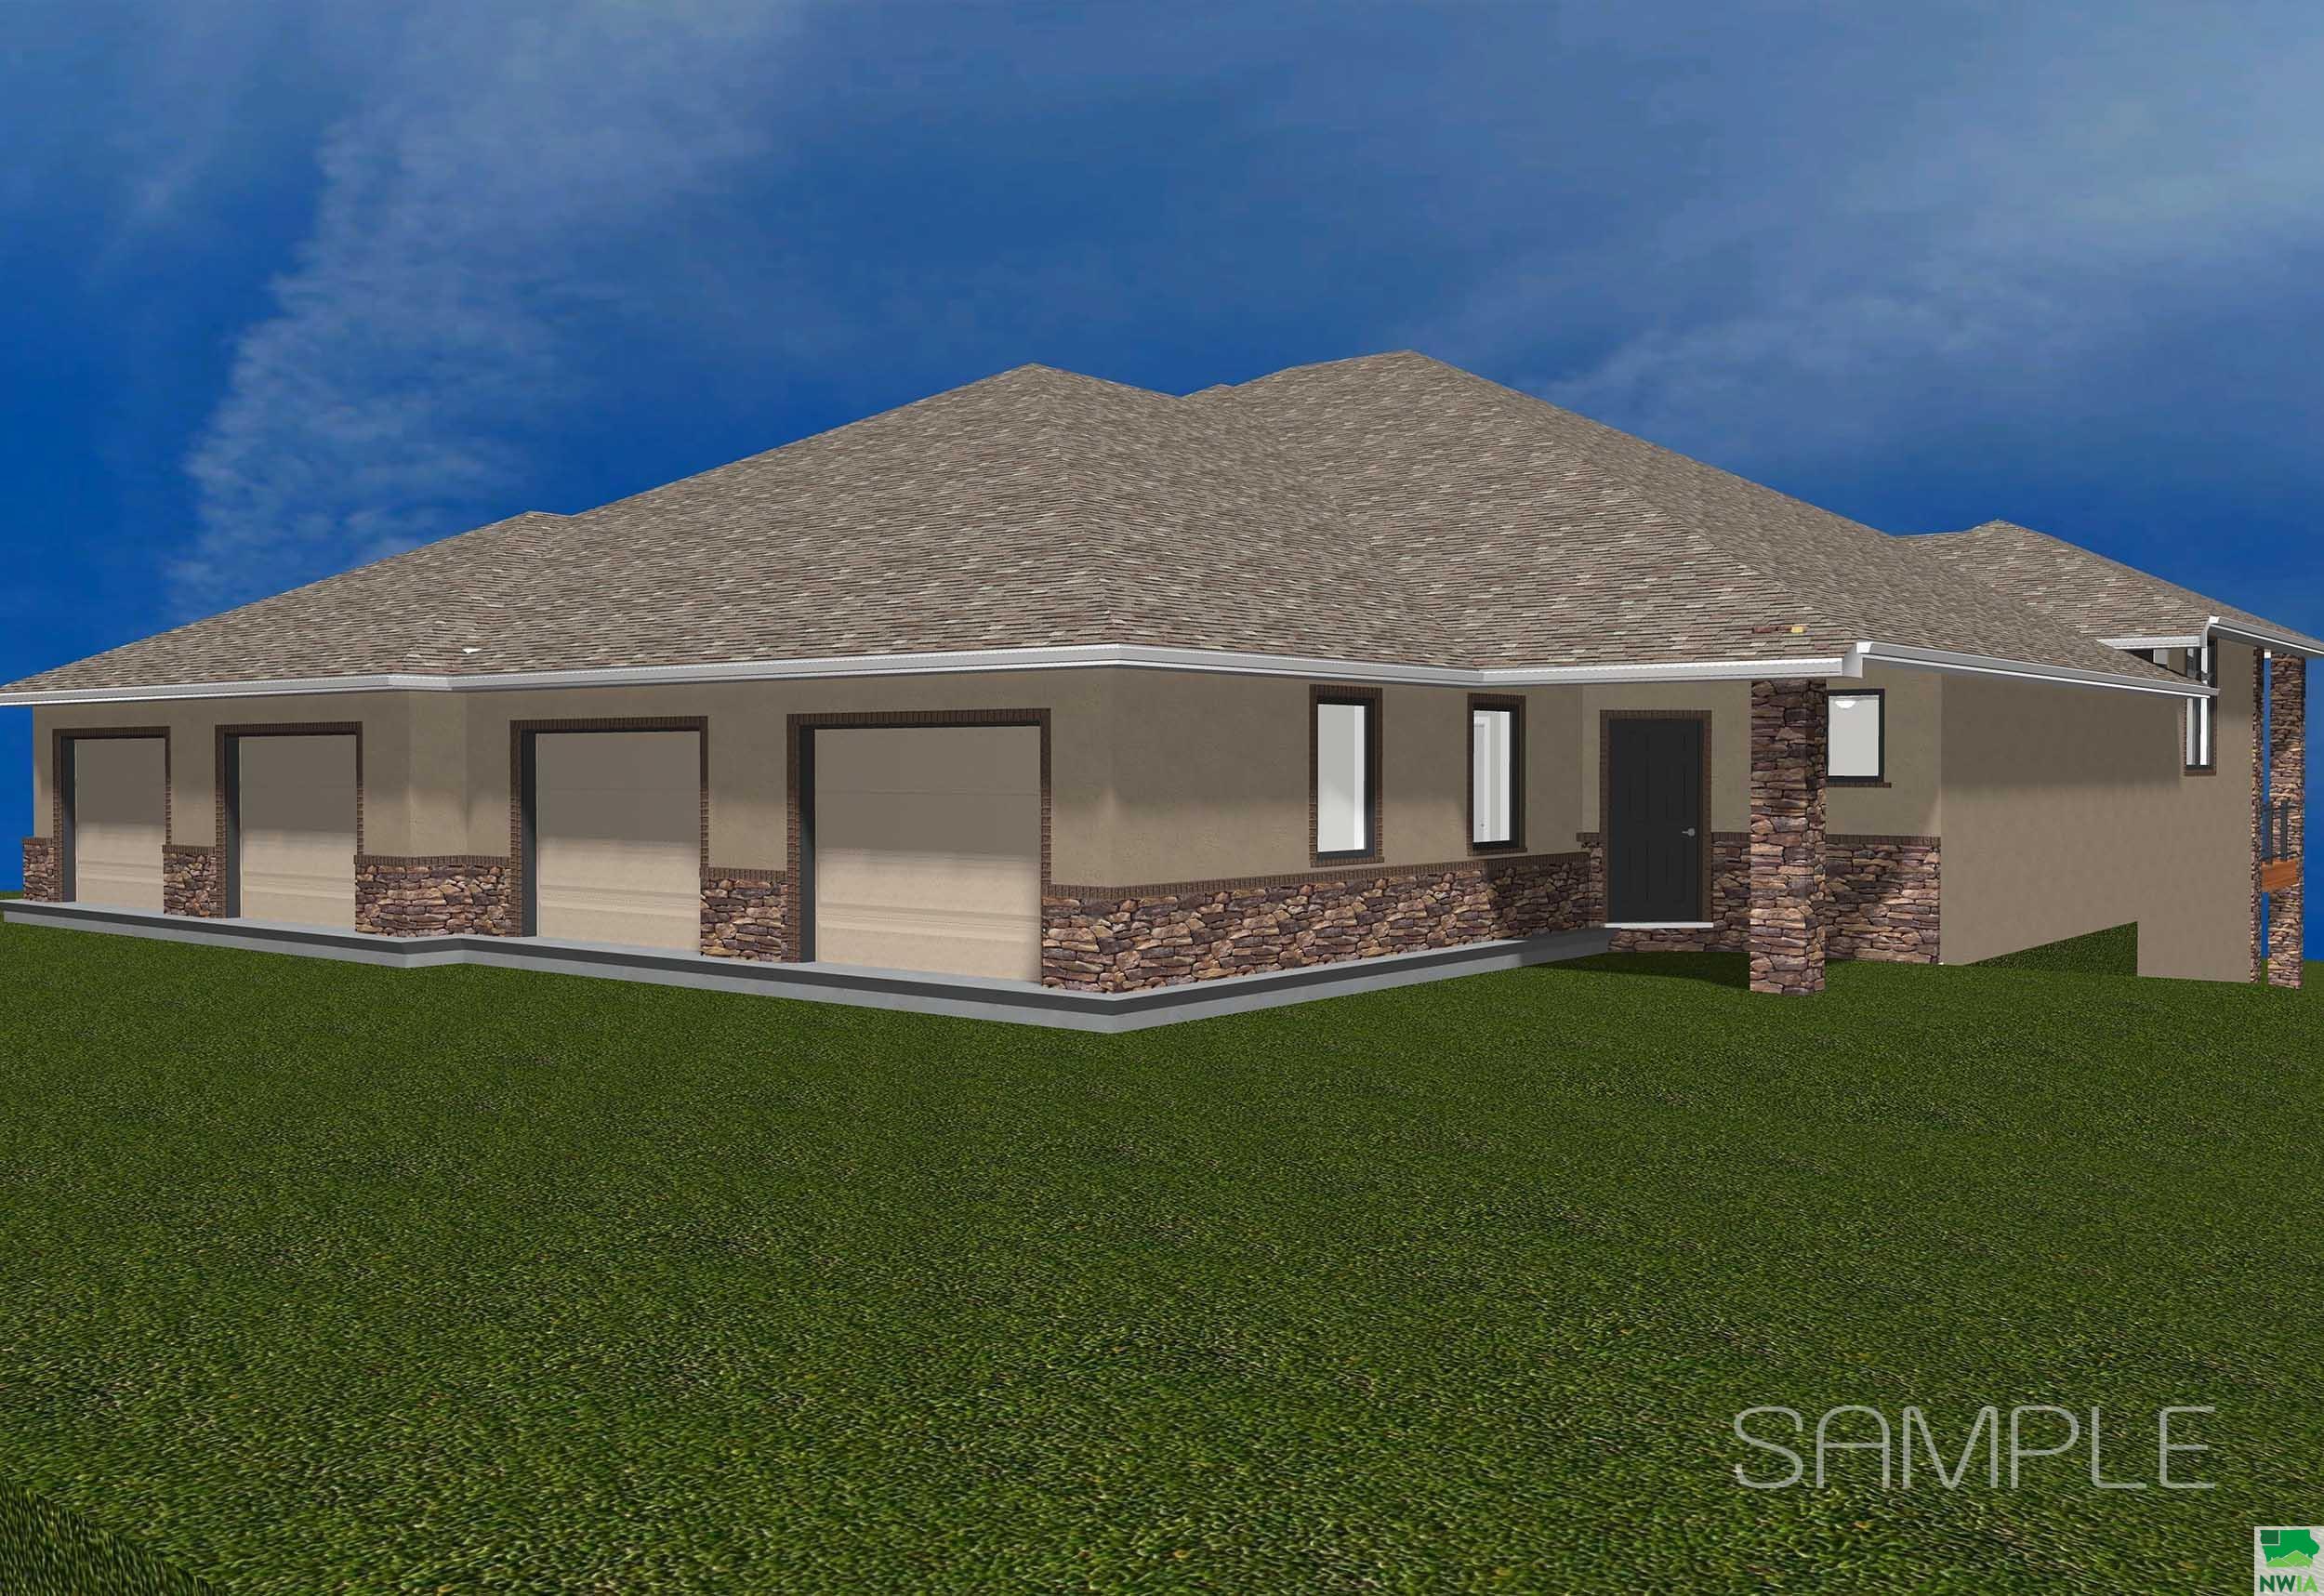 1001 Teres View Drive						  						 , Sioux Center						 , IA						  51250						  